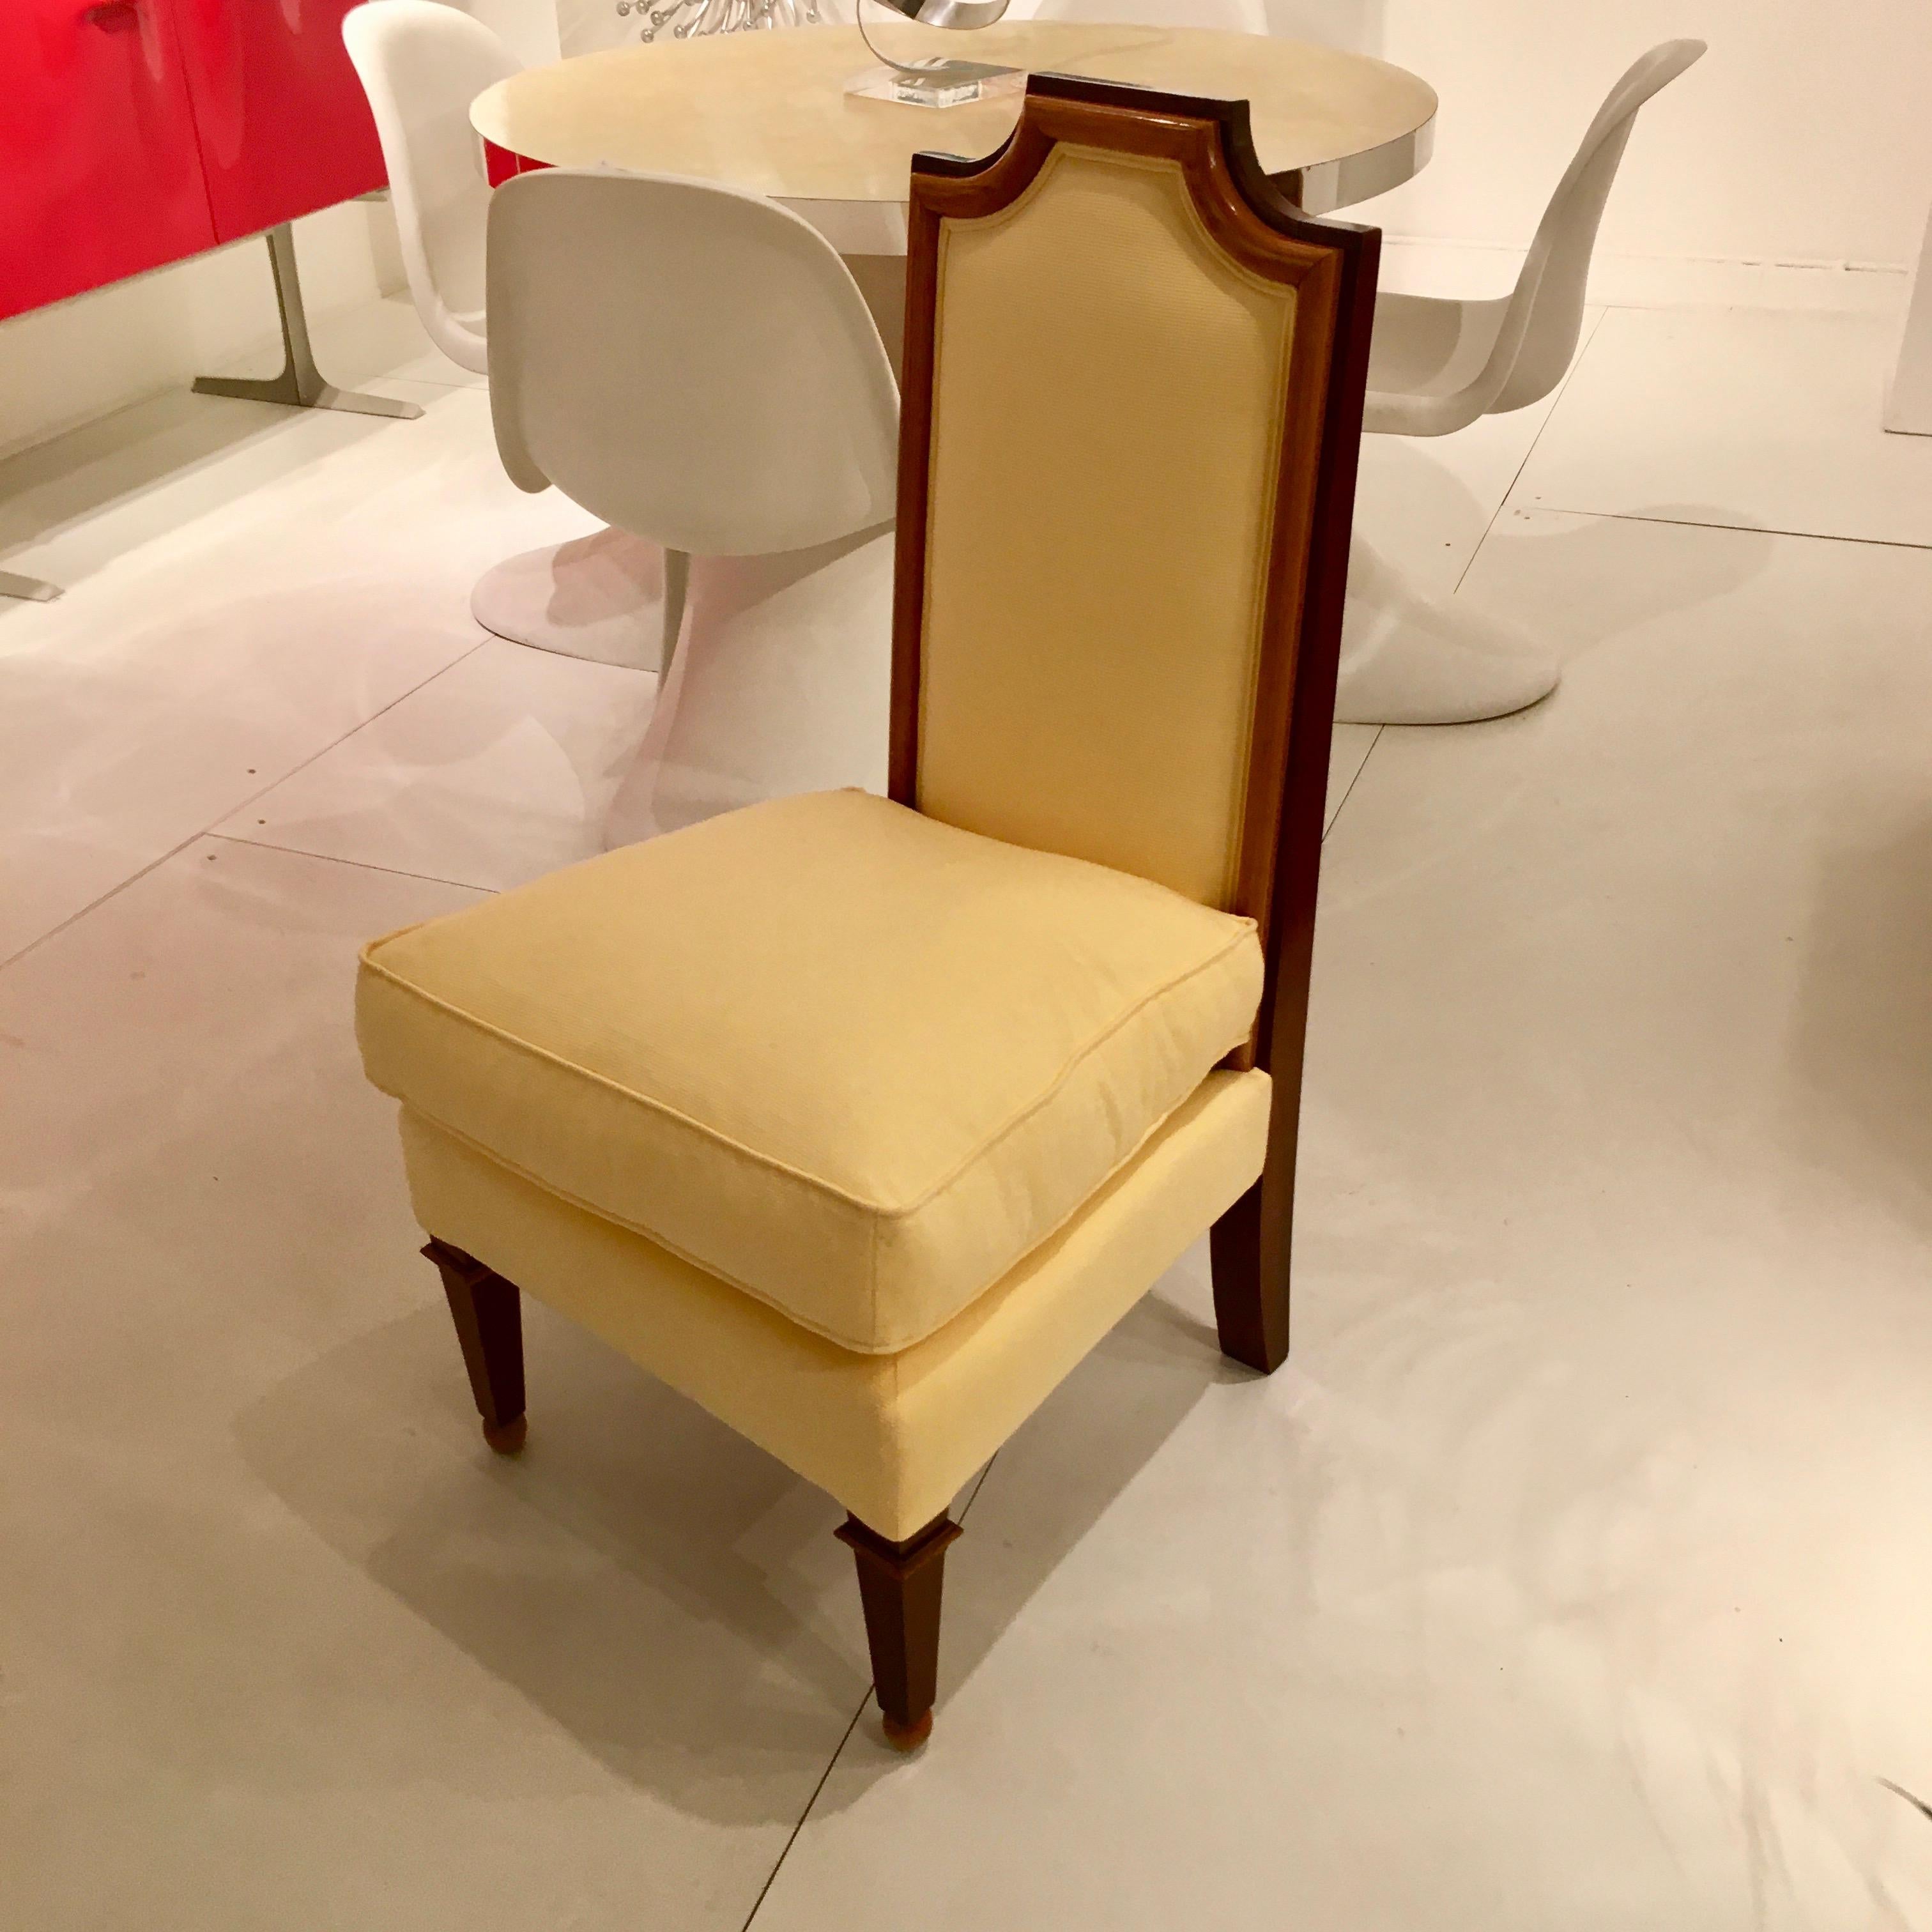 Elegant Neoclassical Chair by Jean-Maurice Rothschild, France, 1948 For Sale 2